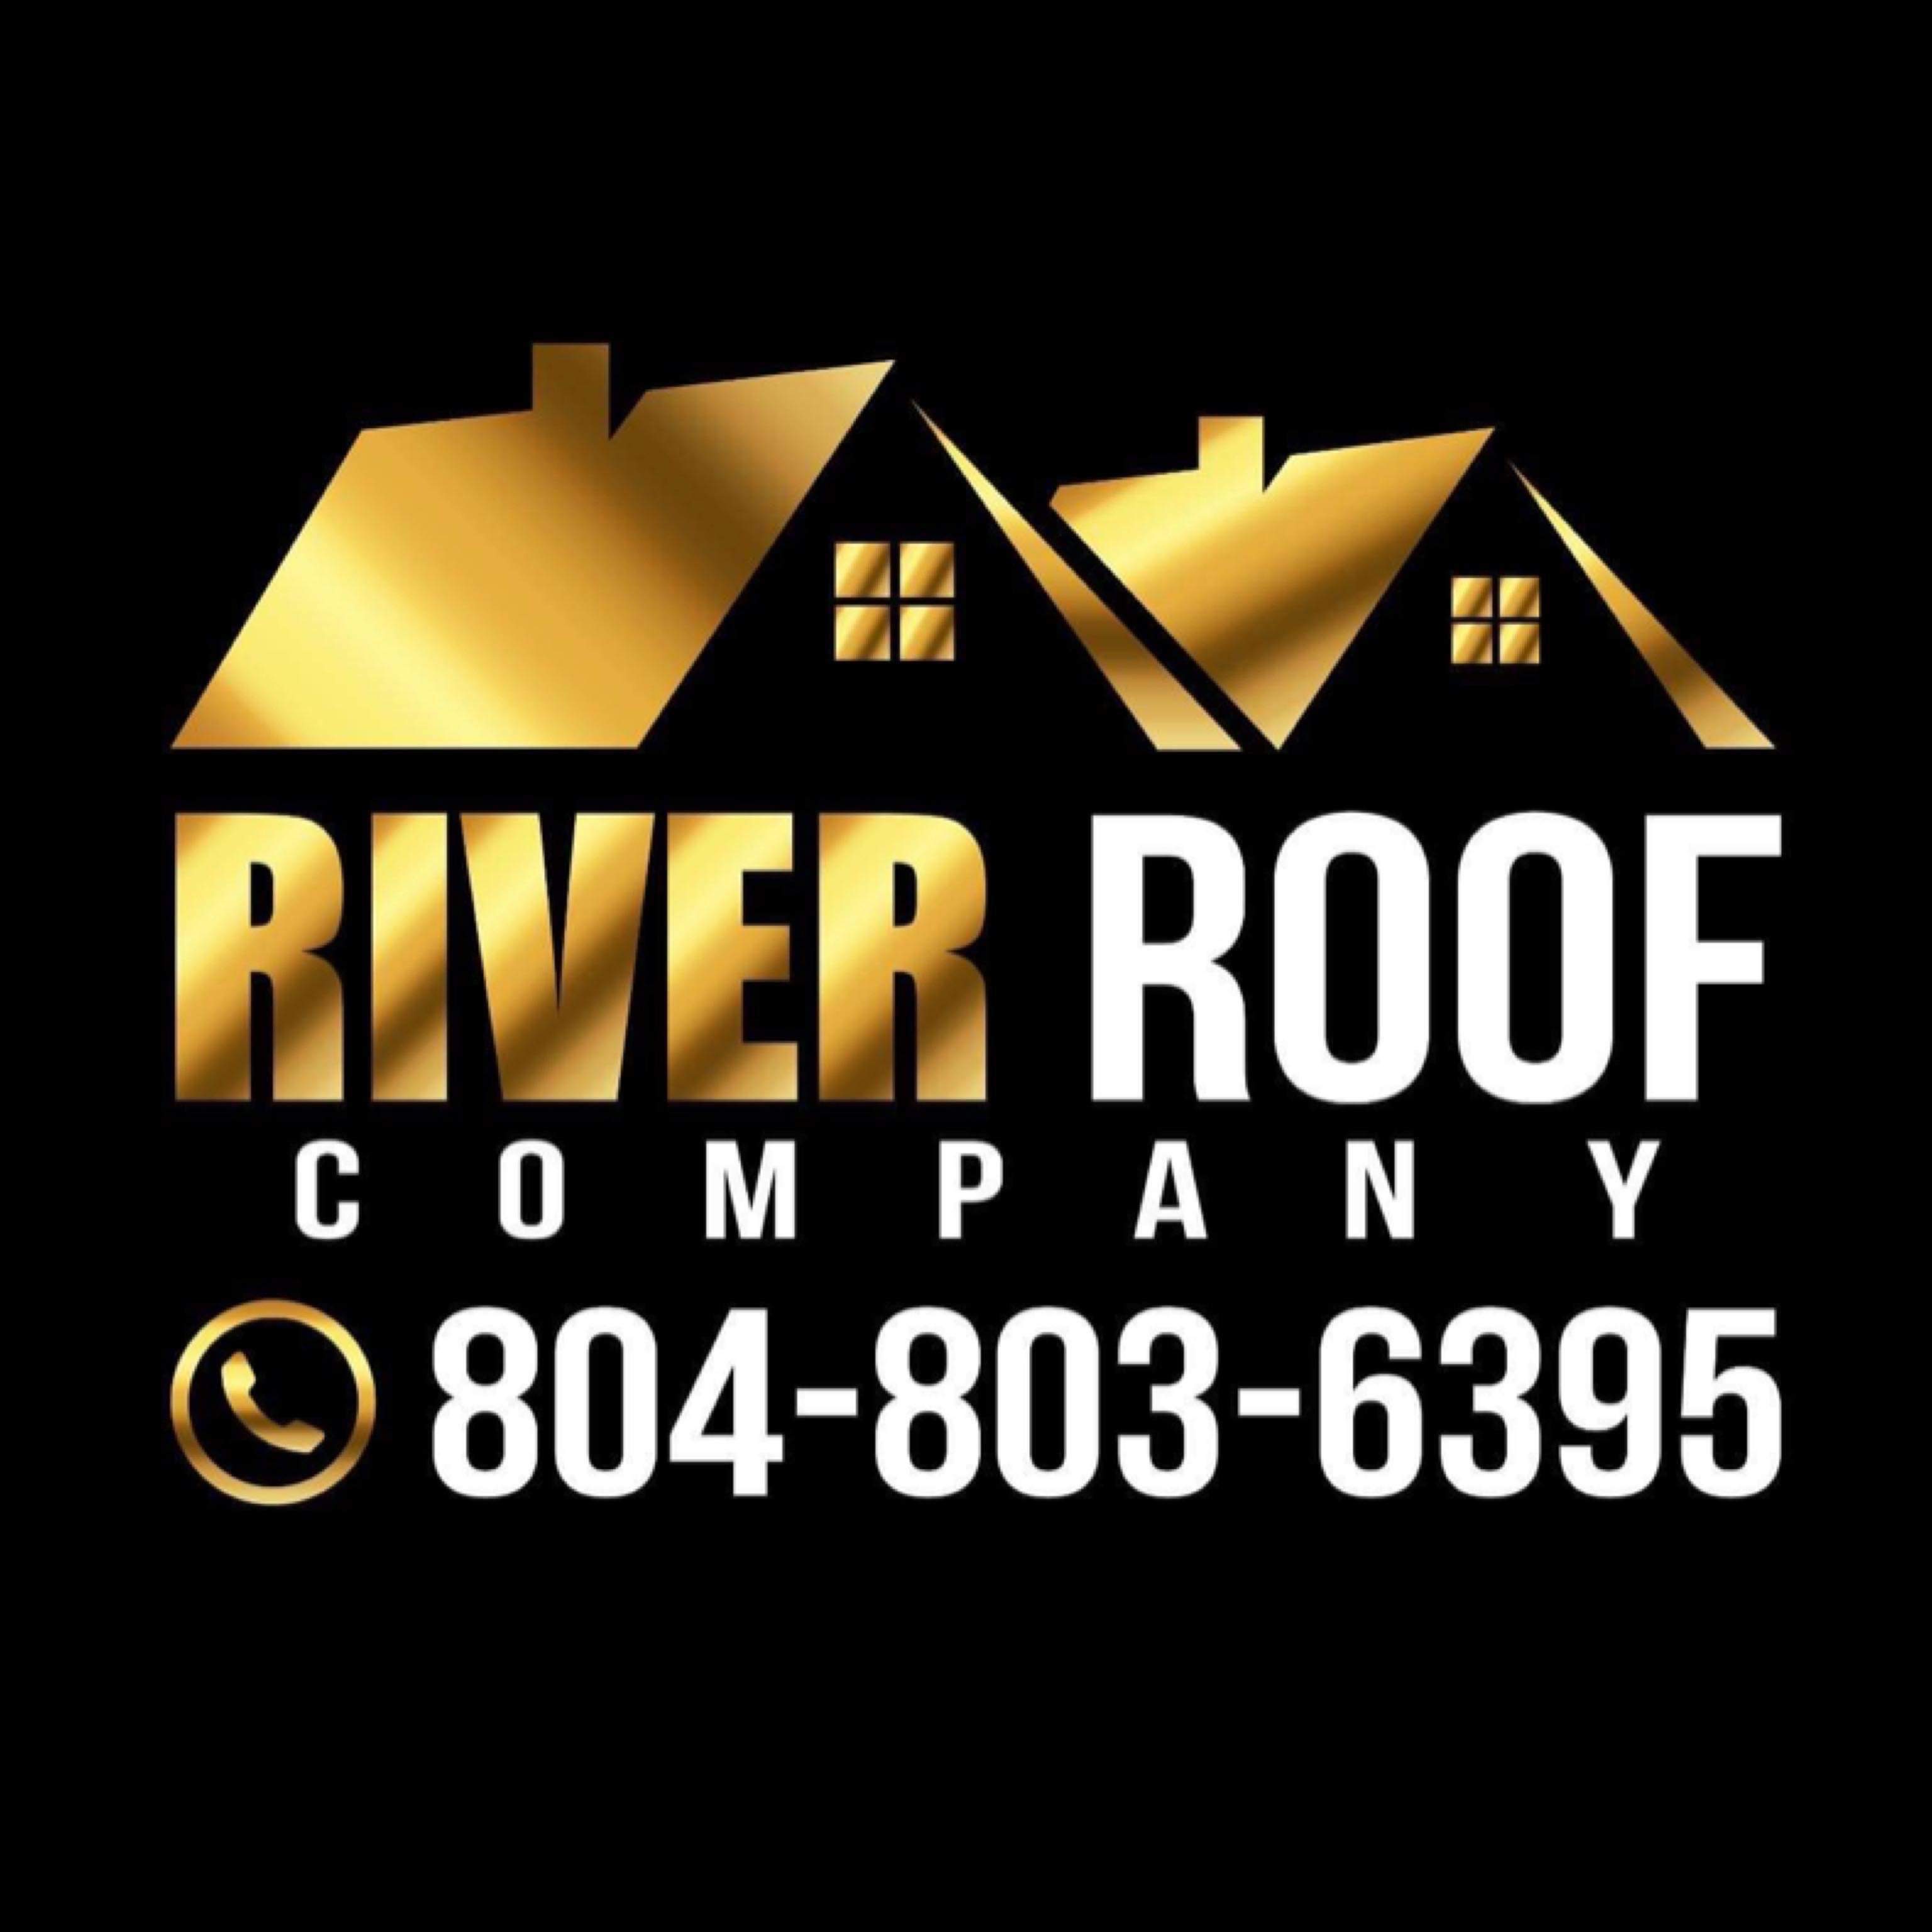 River Roof Company.